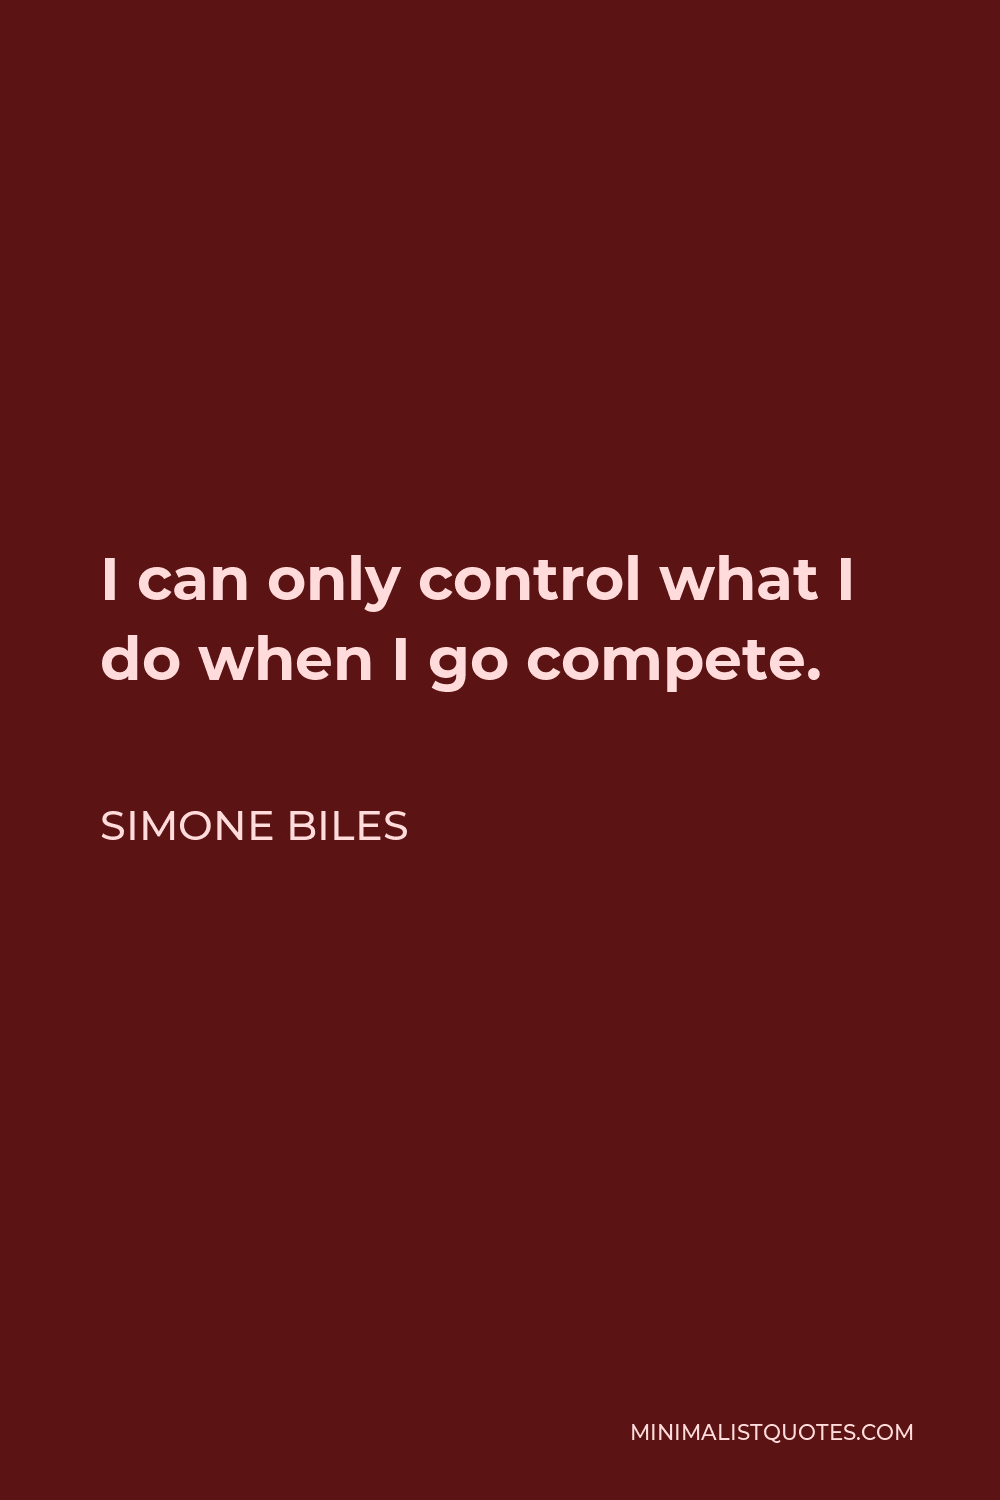 Simone Biles Quote - I can only control what I do when I go compete.